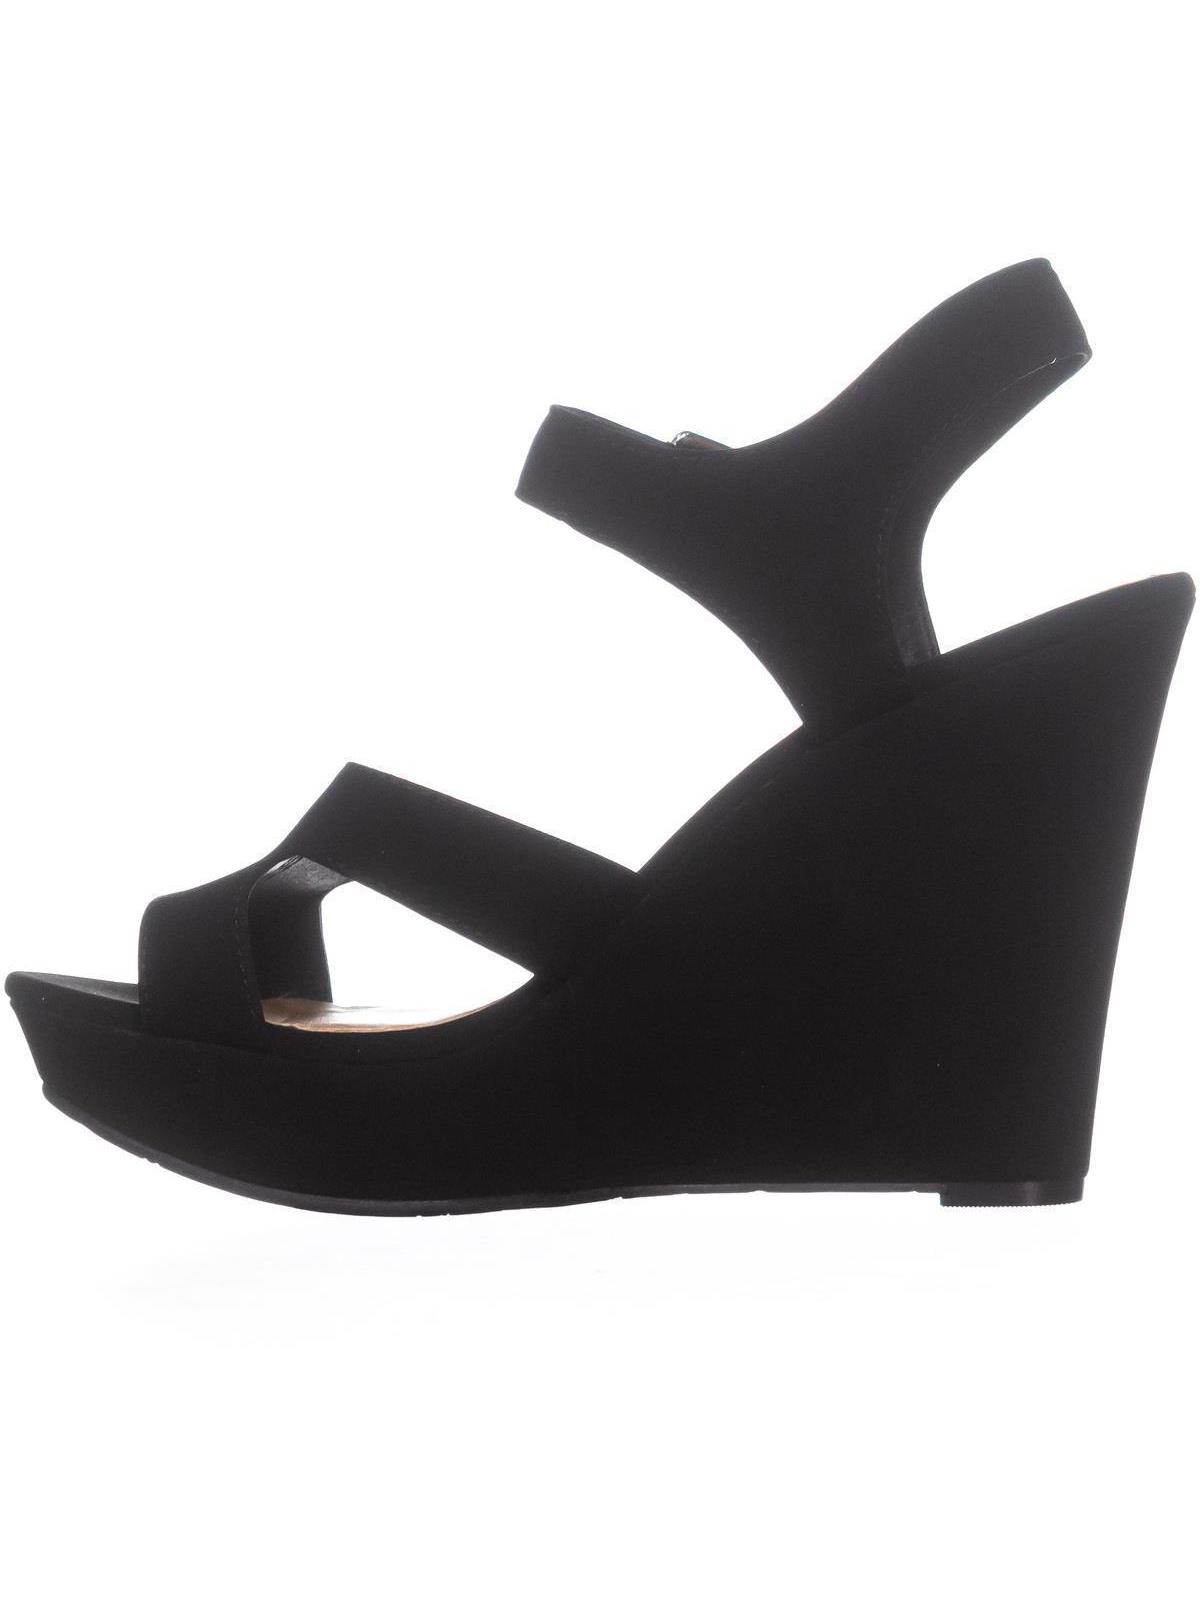 Womens AR35 Rochelle Ankle Strap Wedge Sandals, Black - image 3 of 5